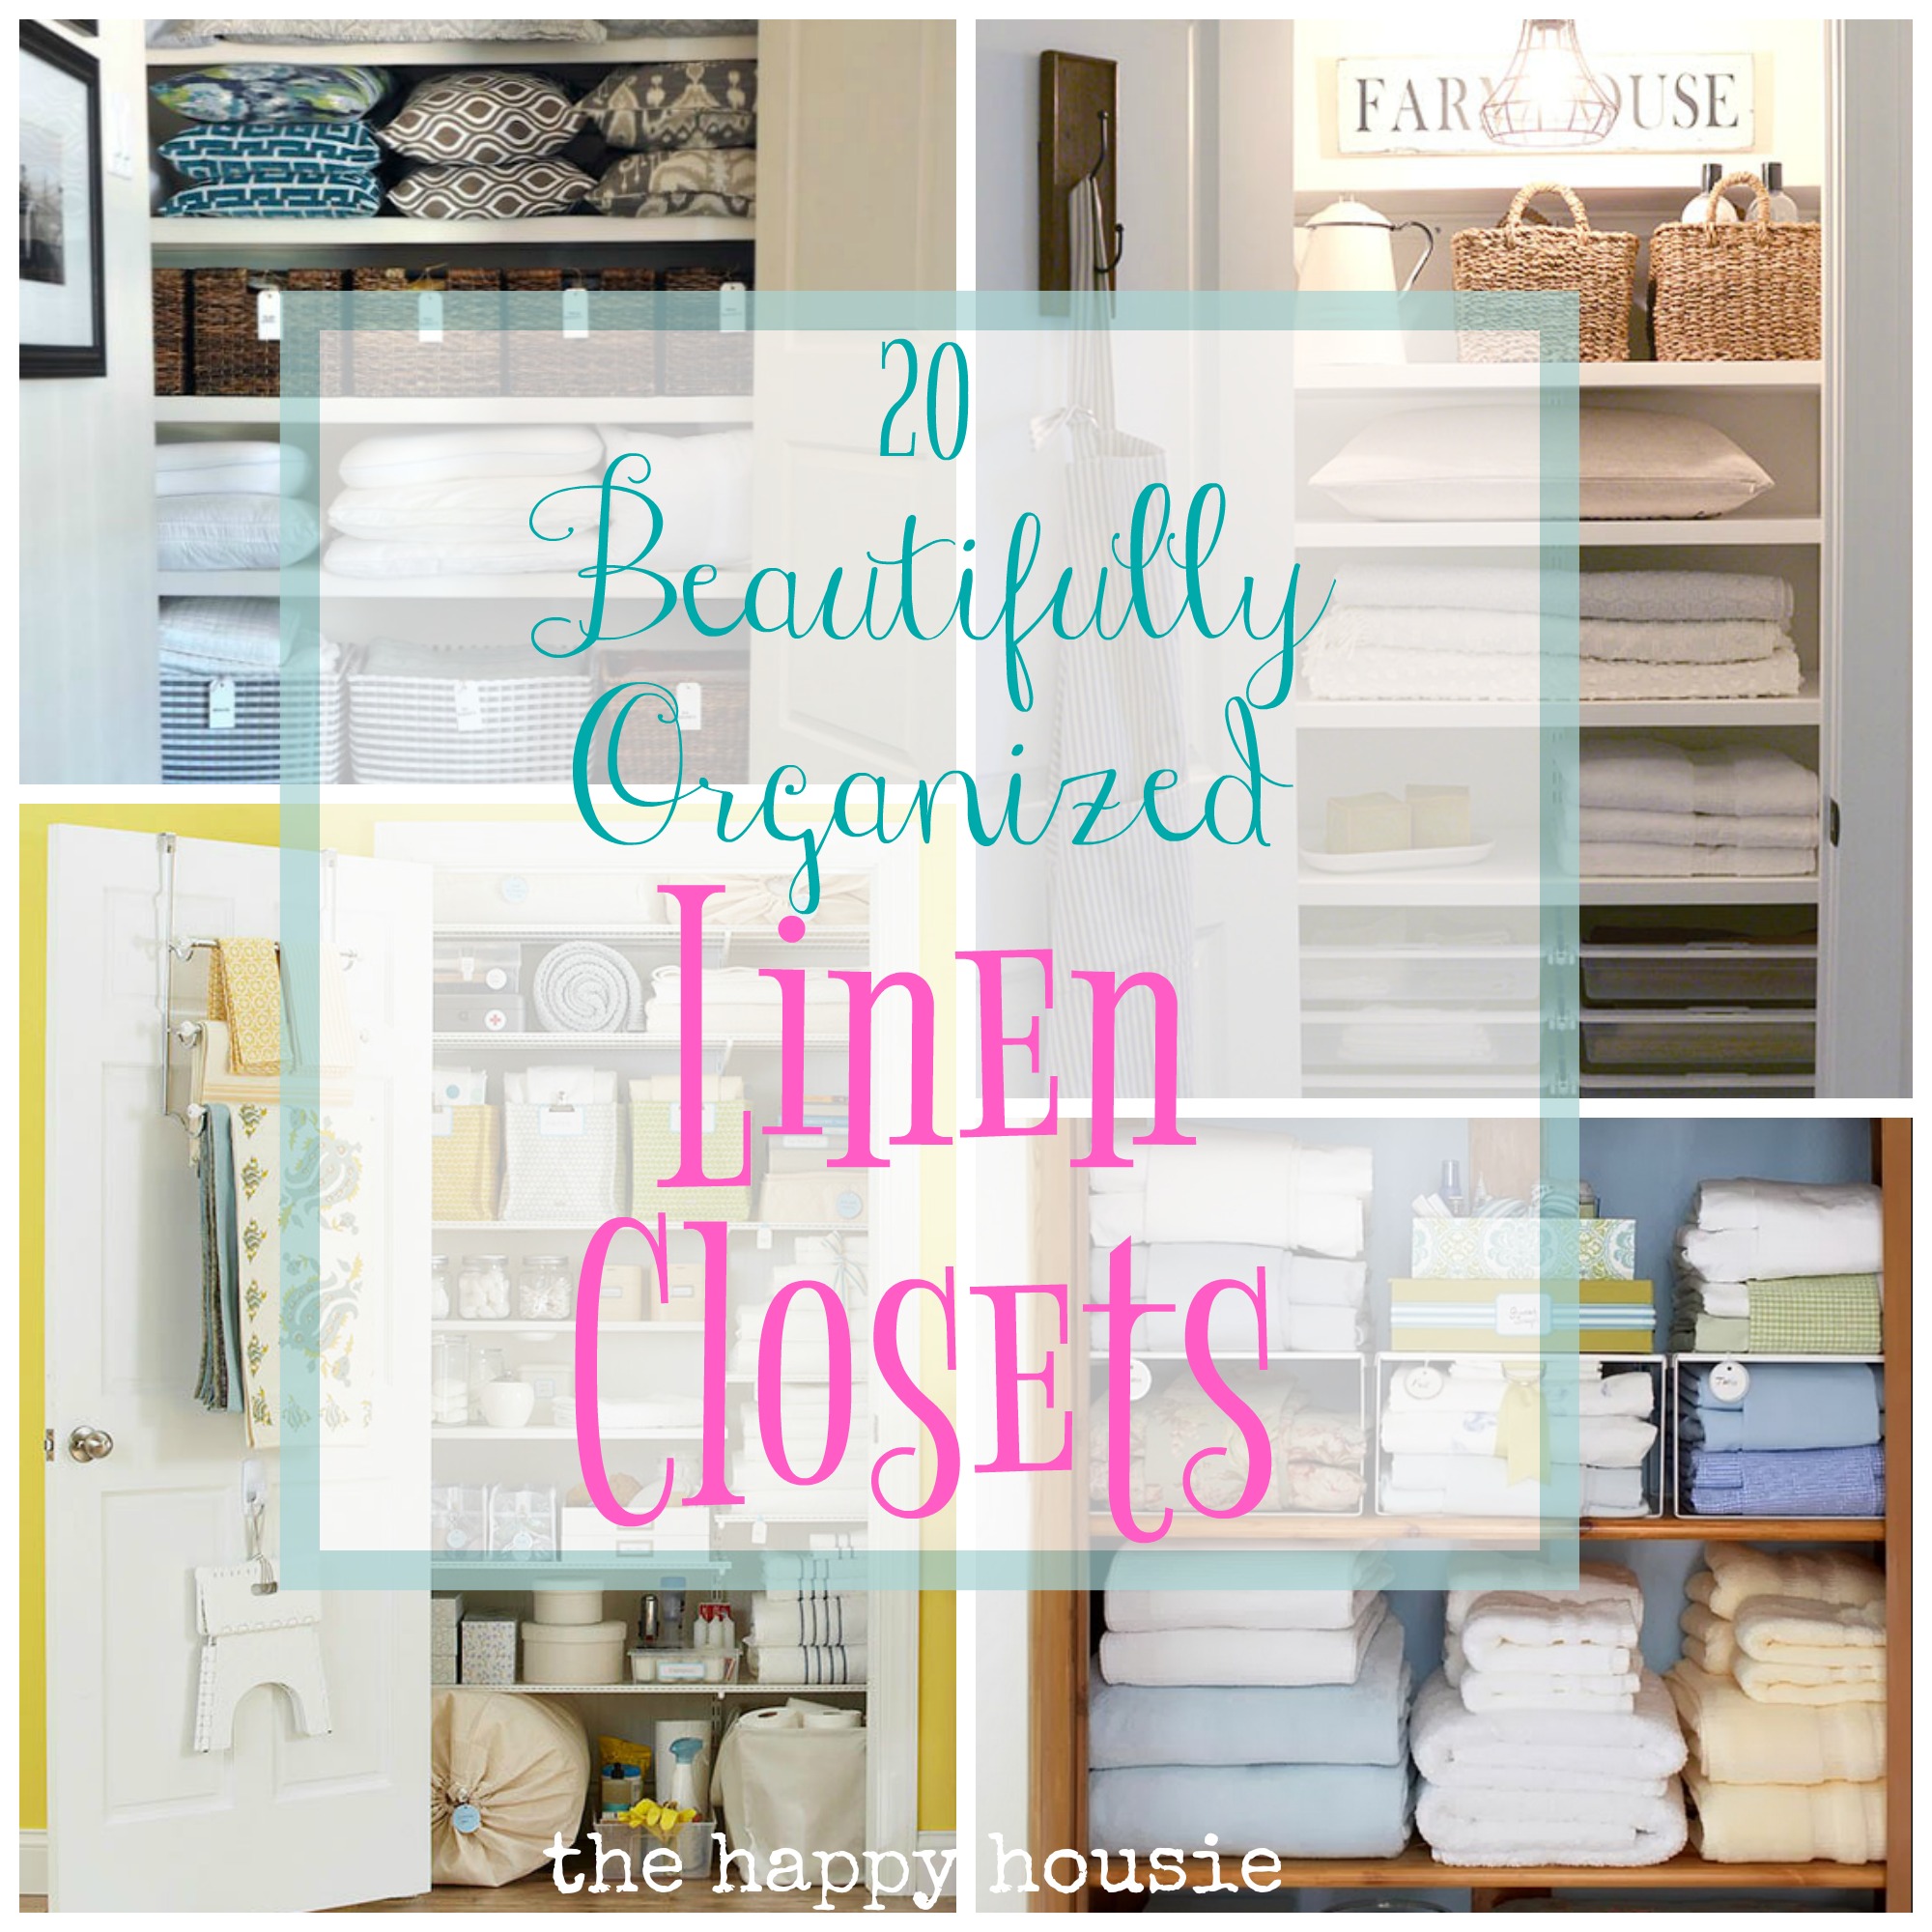 https://www.thehappyhousie.com/wp-content/uploads/2017/02/20-beautifully-organized-linen-closets-and-linen-closet-organization-makeover-ideas-at-the-happy-housie.jpg